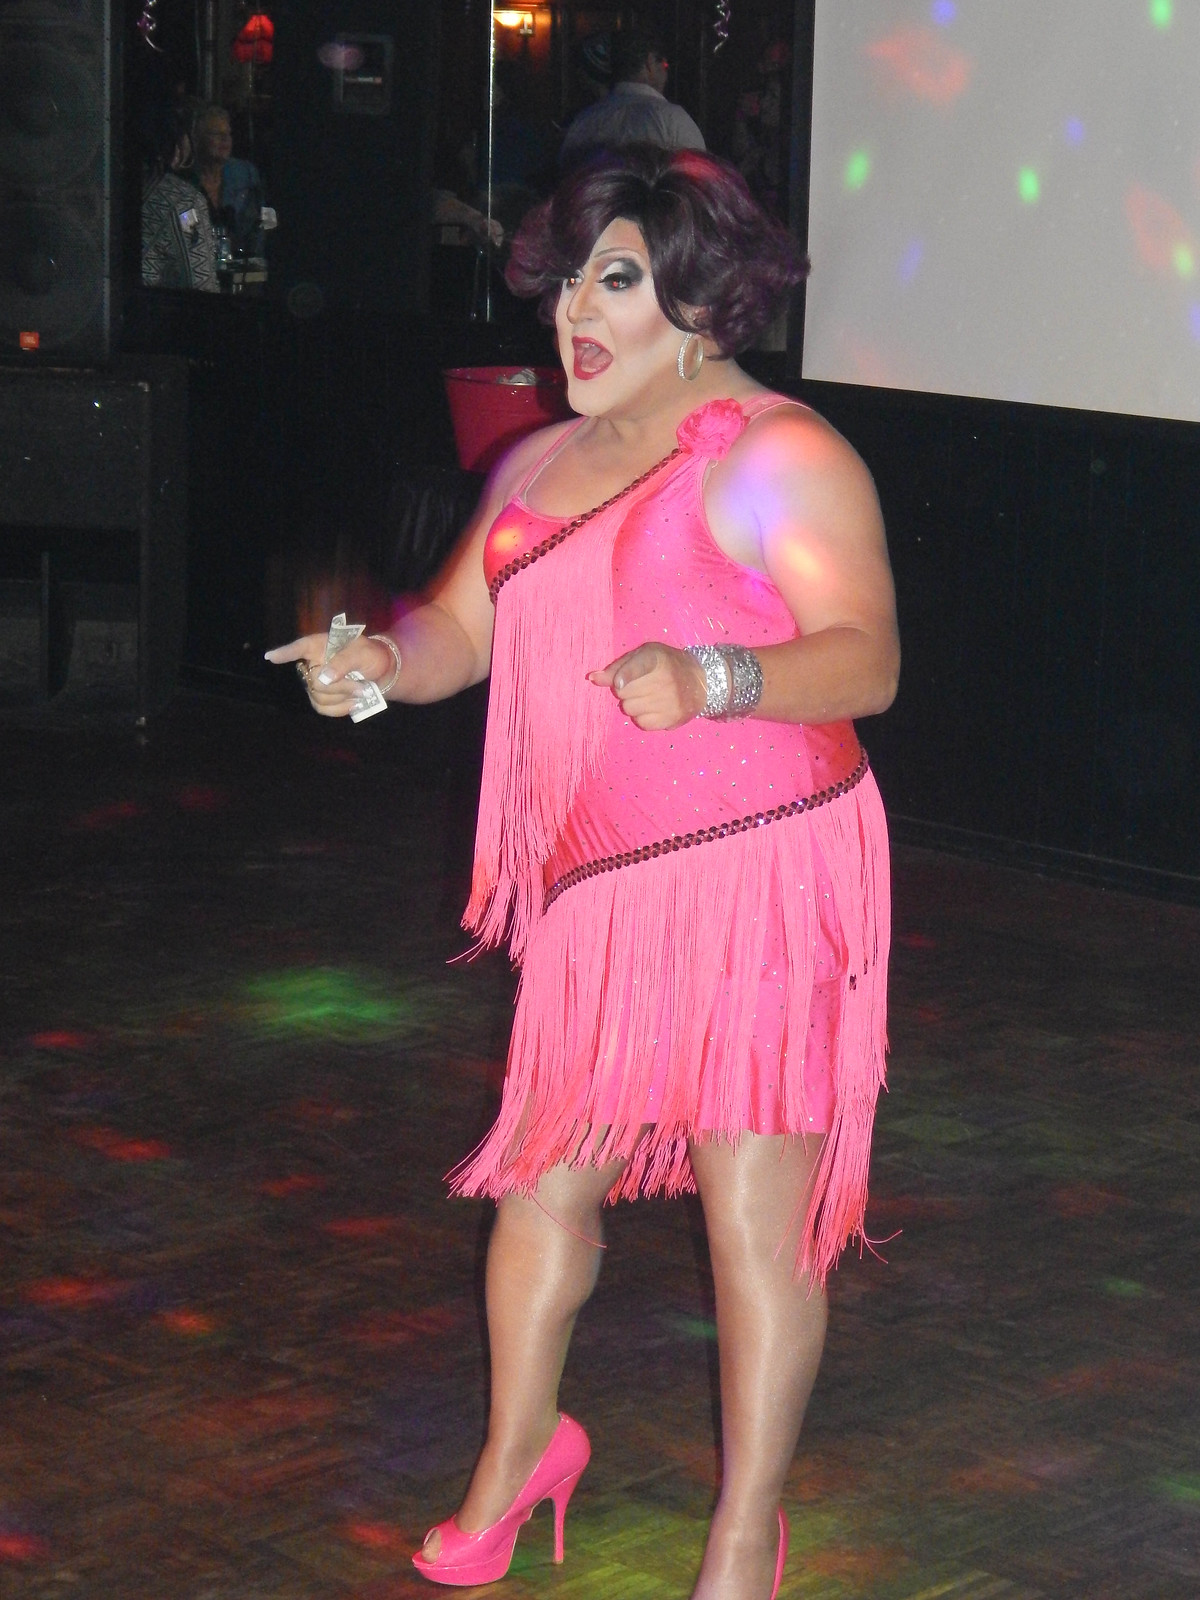 Michelle Michaels performing